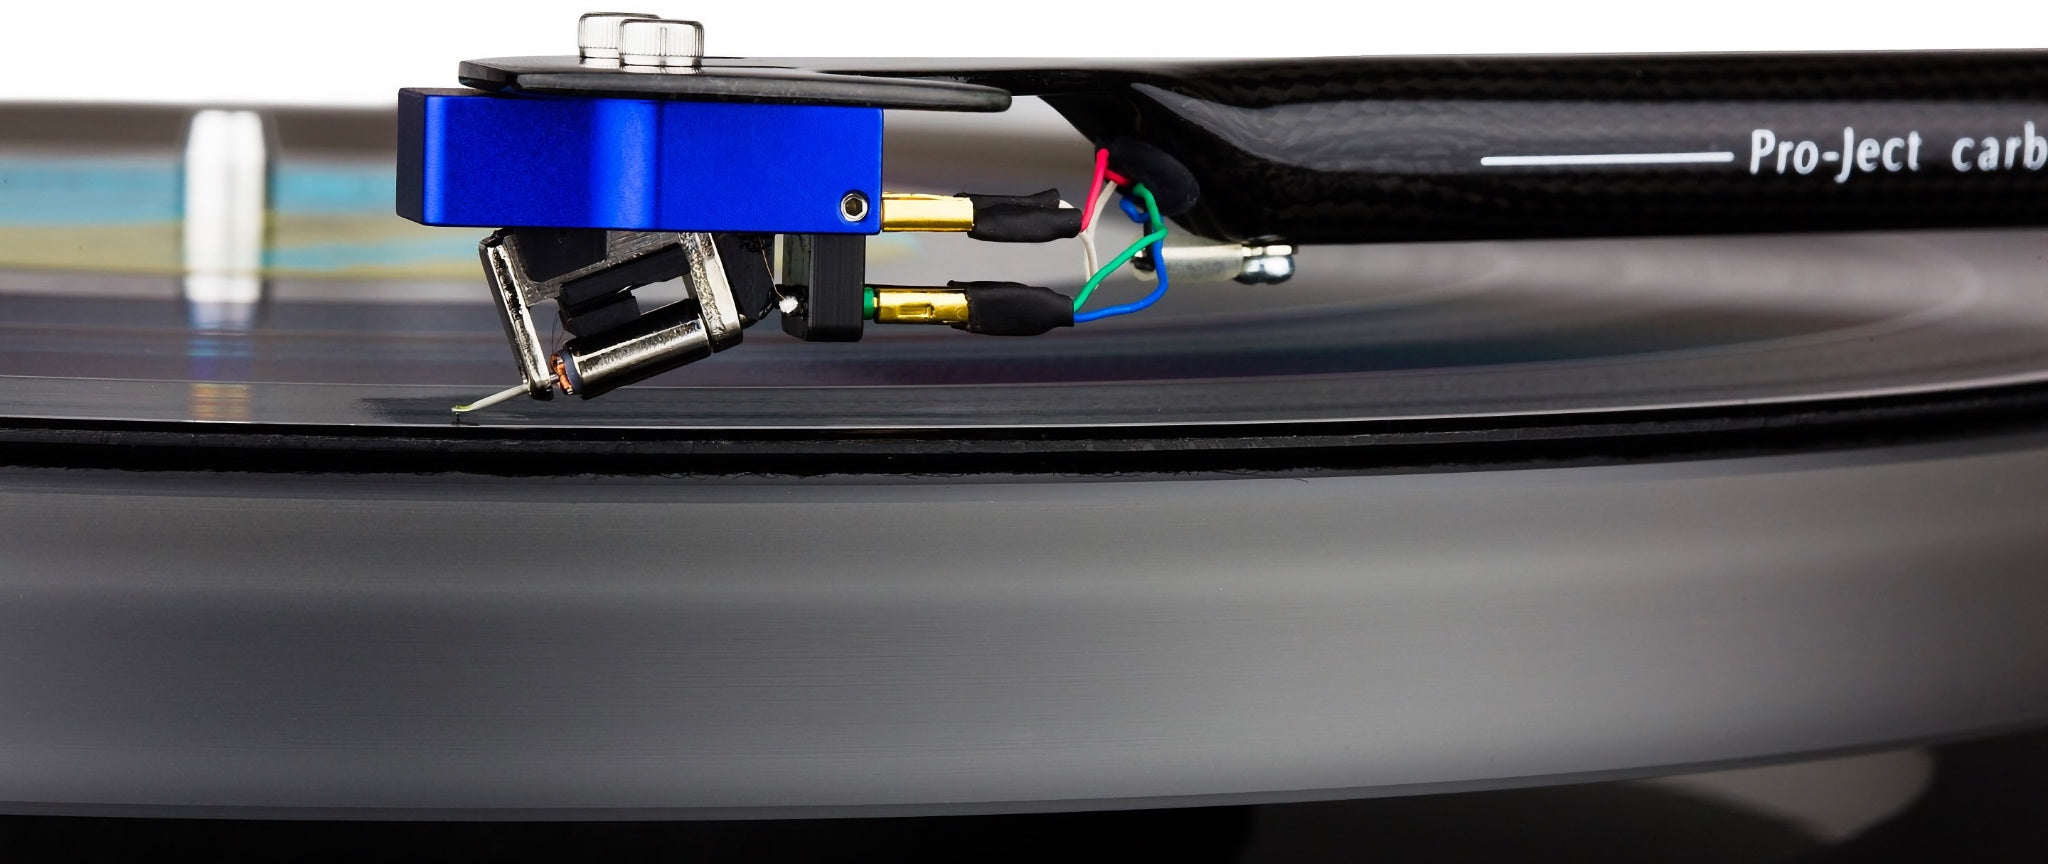 Sumiko Songbird cartridge mounted on Pro-Ject turntable with active vinyl playing